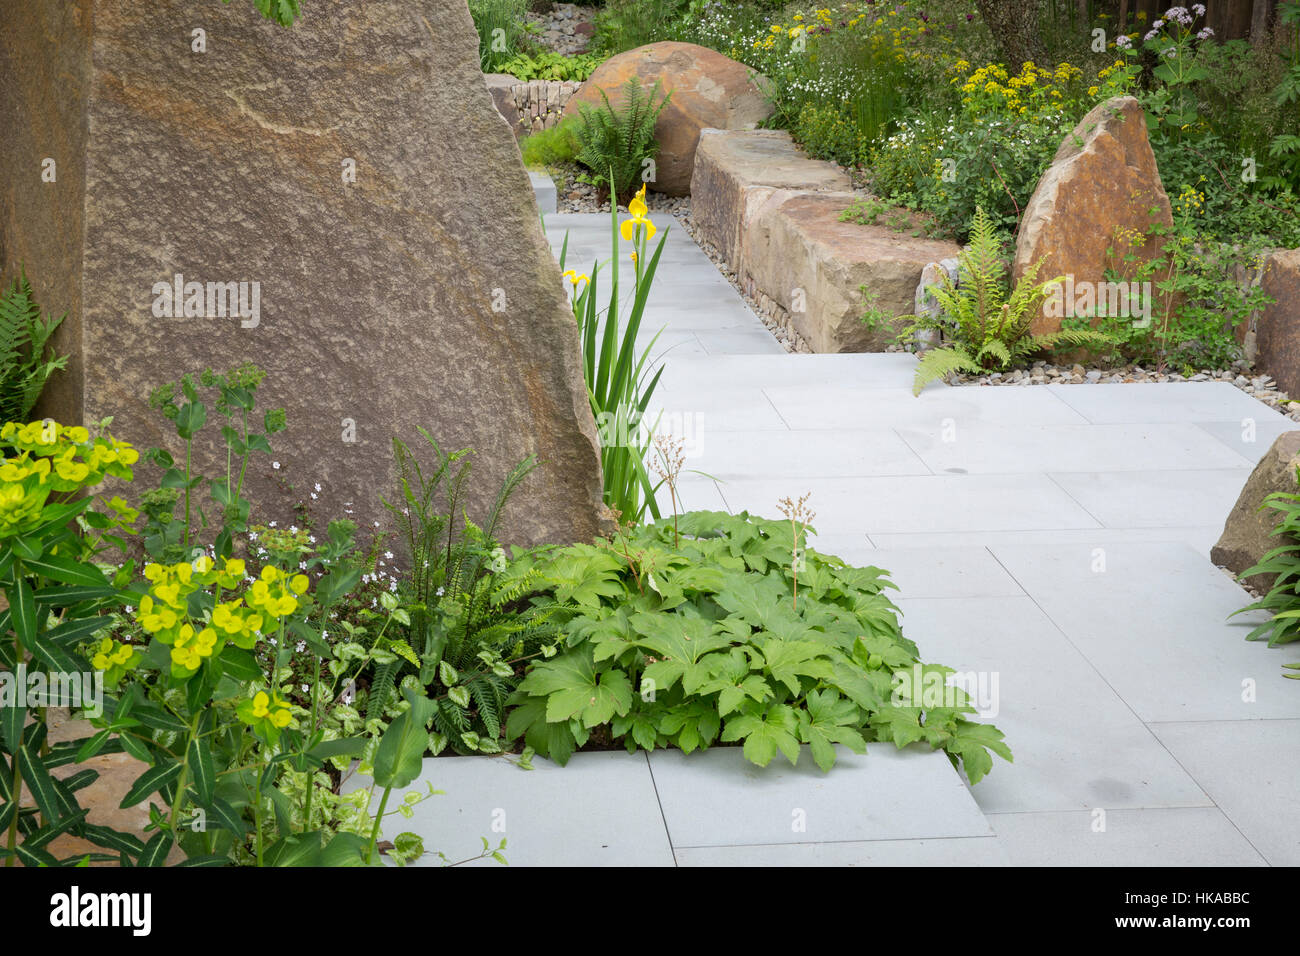 Stone paving garden path in a contemporary garden with stone boulders for raised beds The M&G Garden,Cleve West, Chelsea Flower Show, London  UK Stock Photo